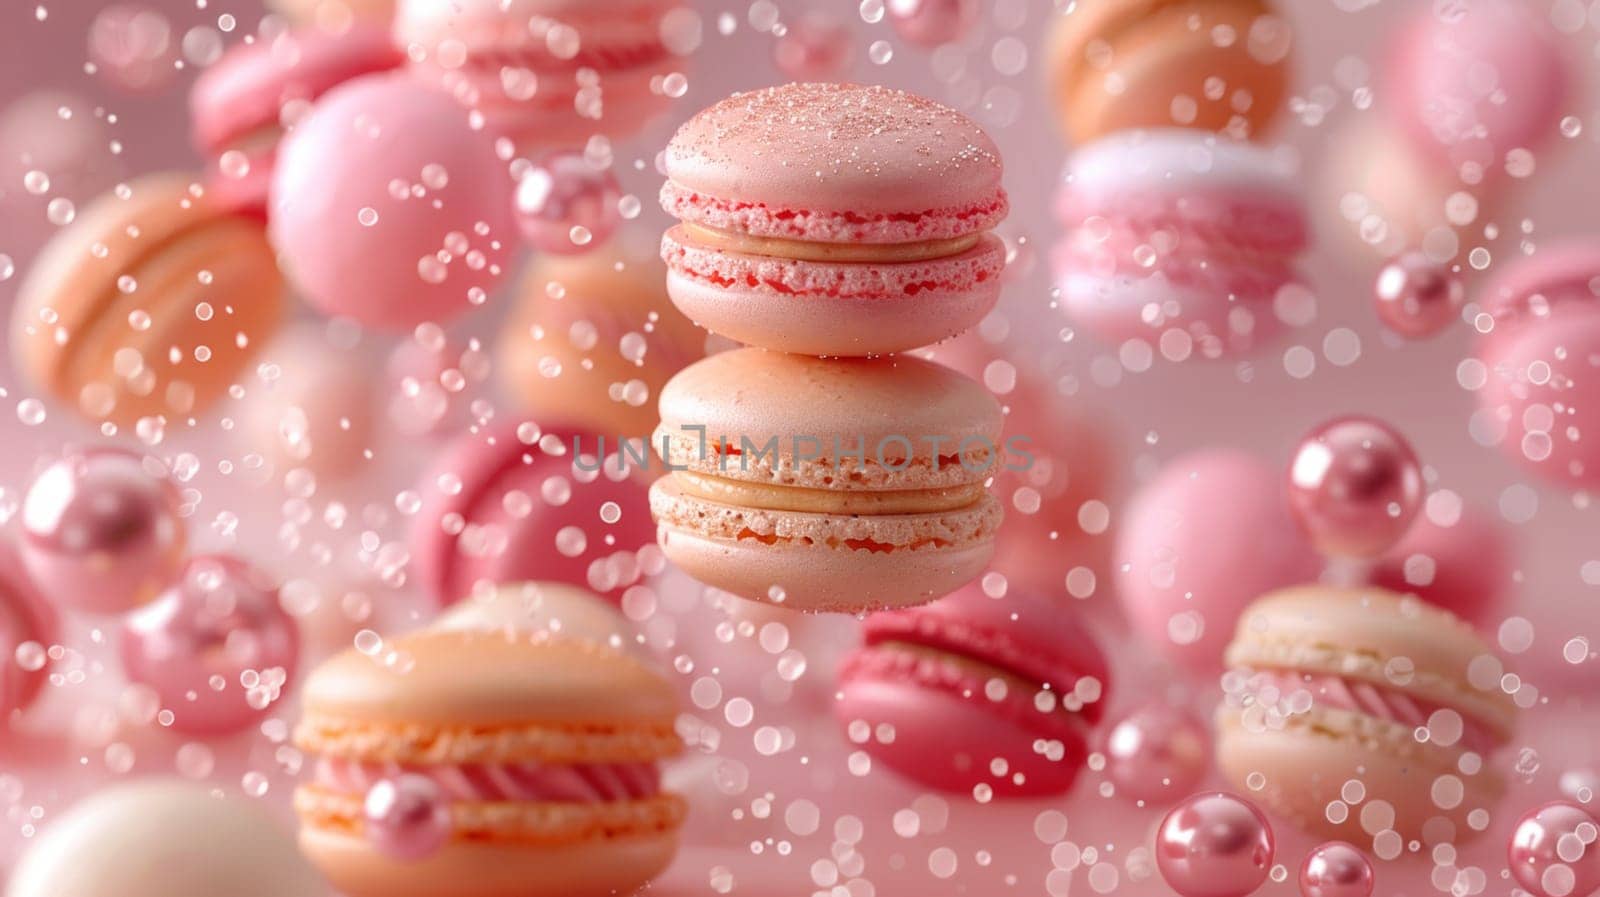 A delightful moment captured as a group of colorful macaroons gracefully float in the air, creating a whimsical and magical sight.